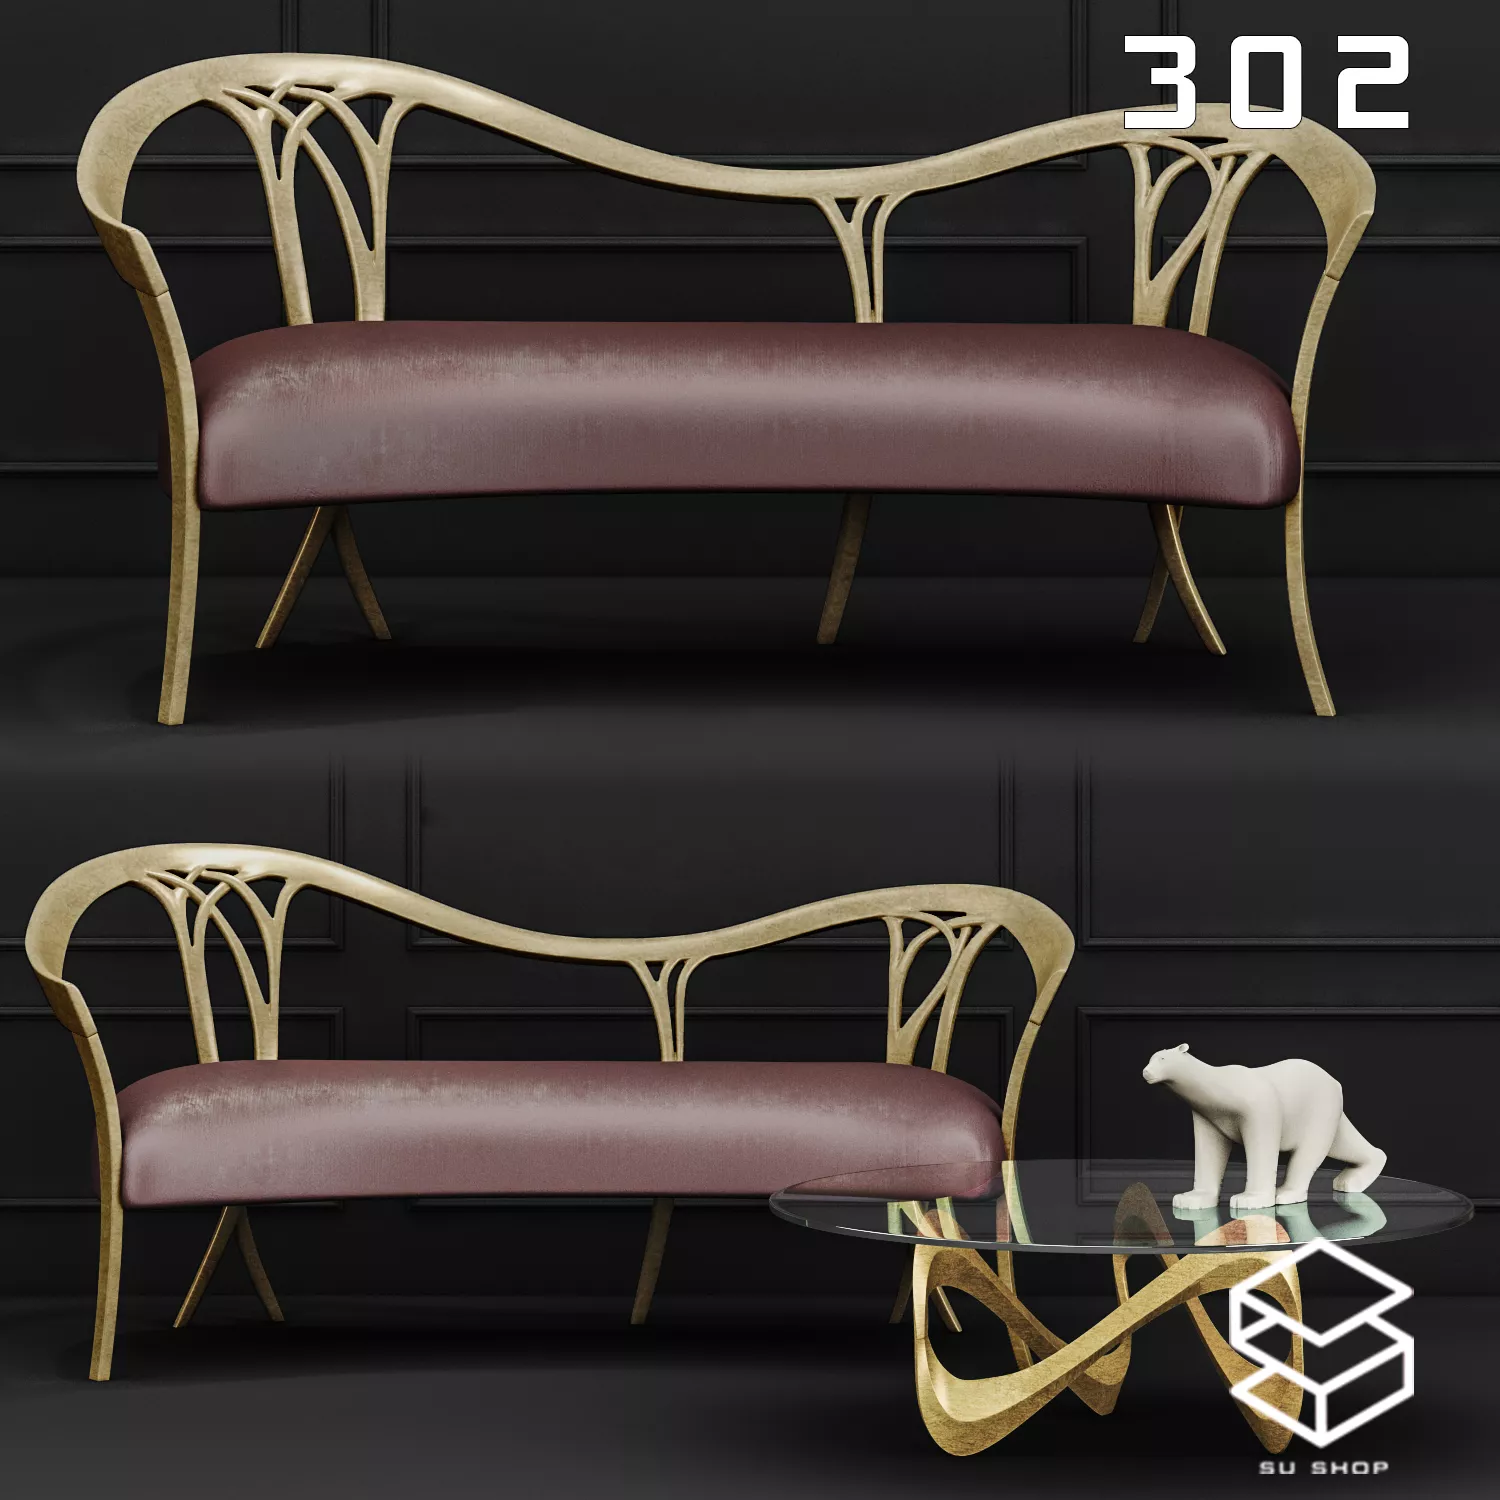 MODERN SOFA - SKETCHUP 3D MODEL - VRAY OR ENSCAPE - ID13611